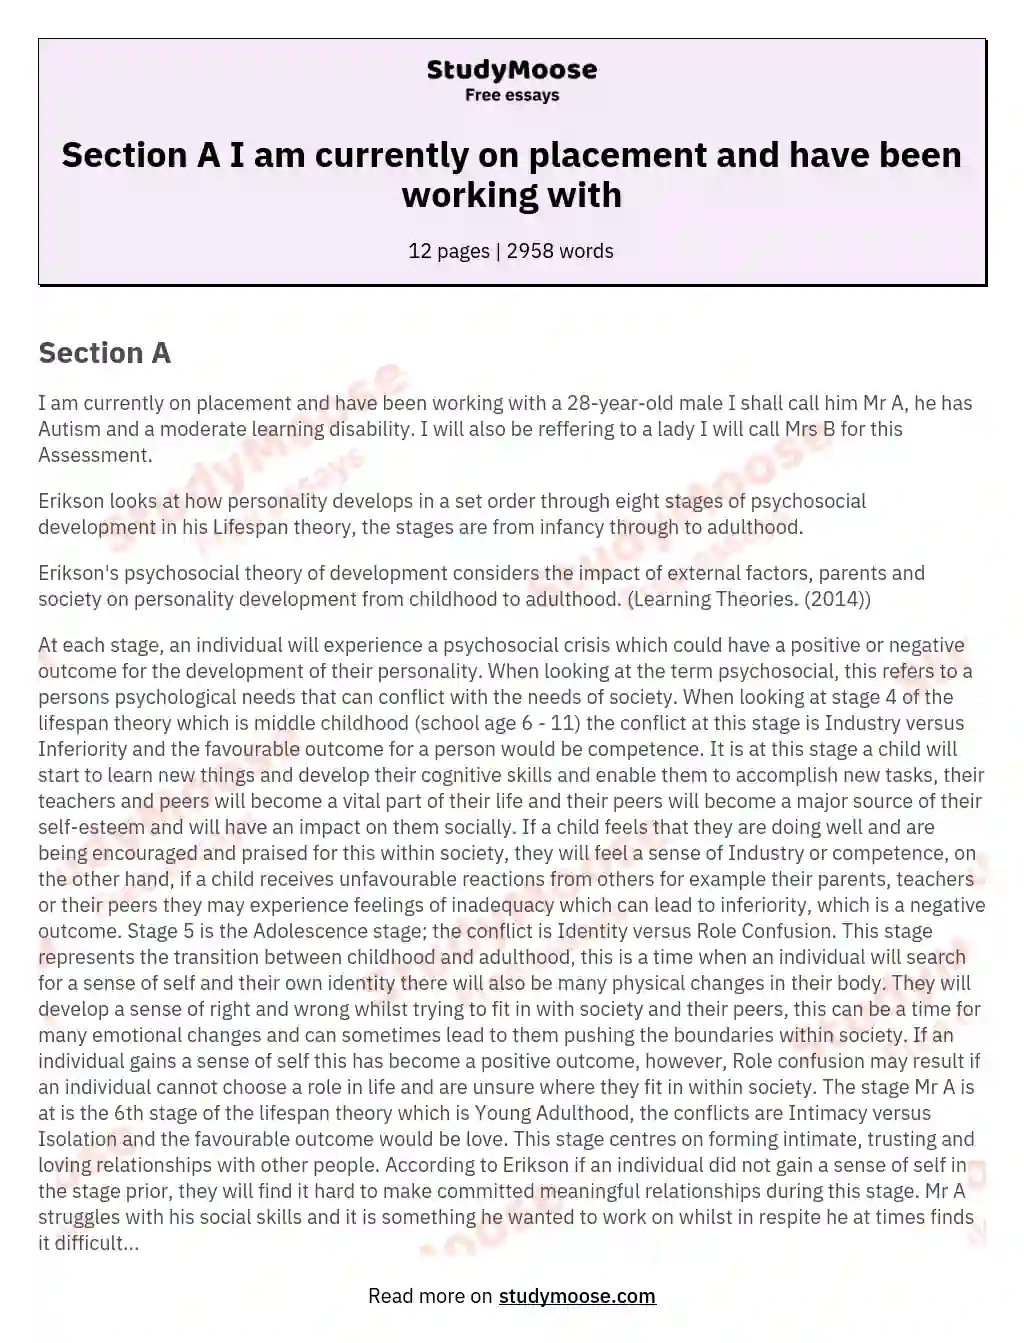 Section A I am currently on placement and have been working with essay